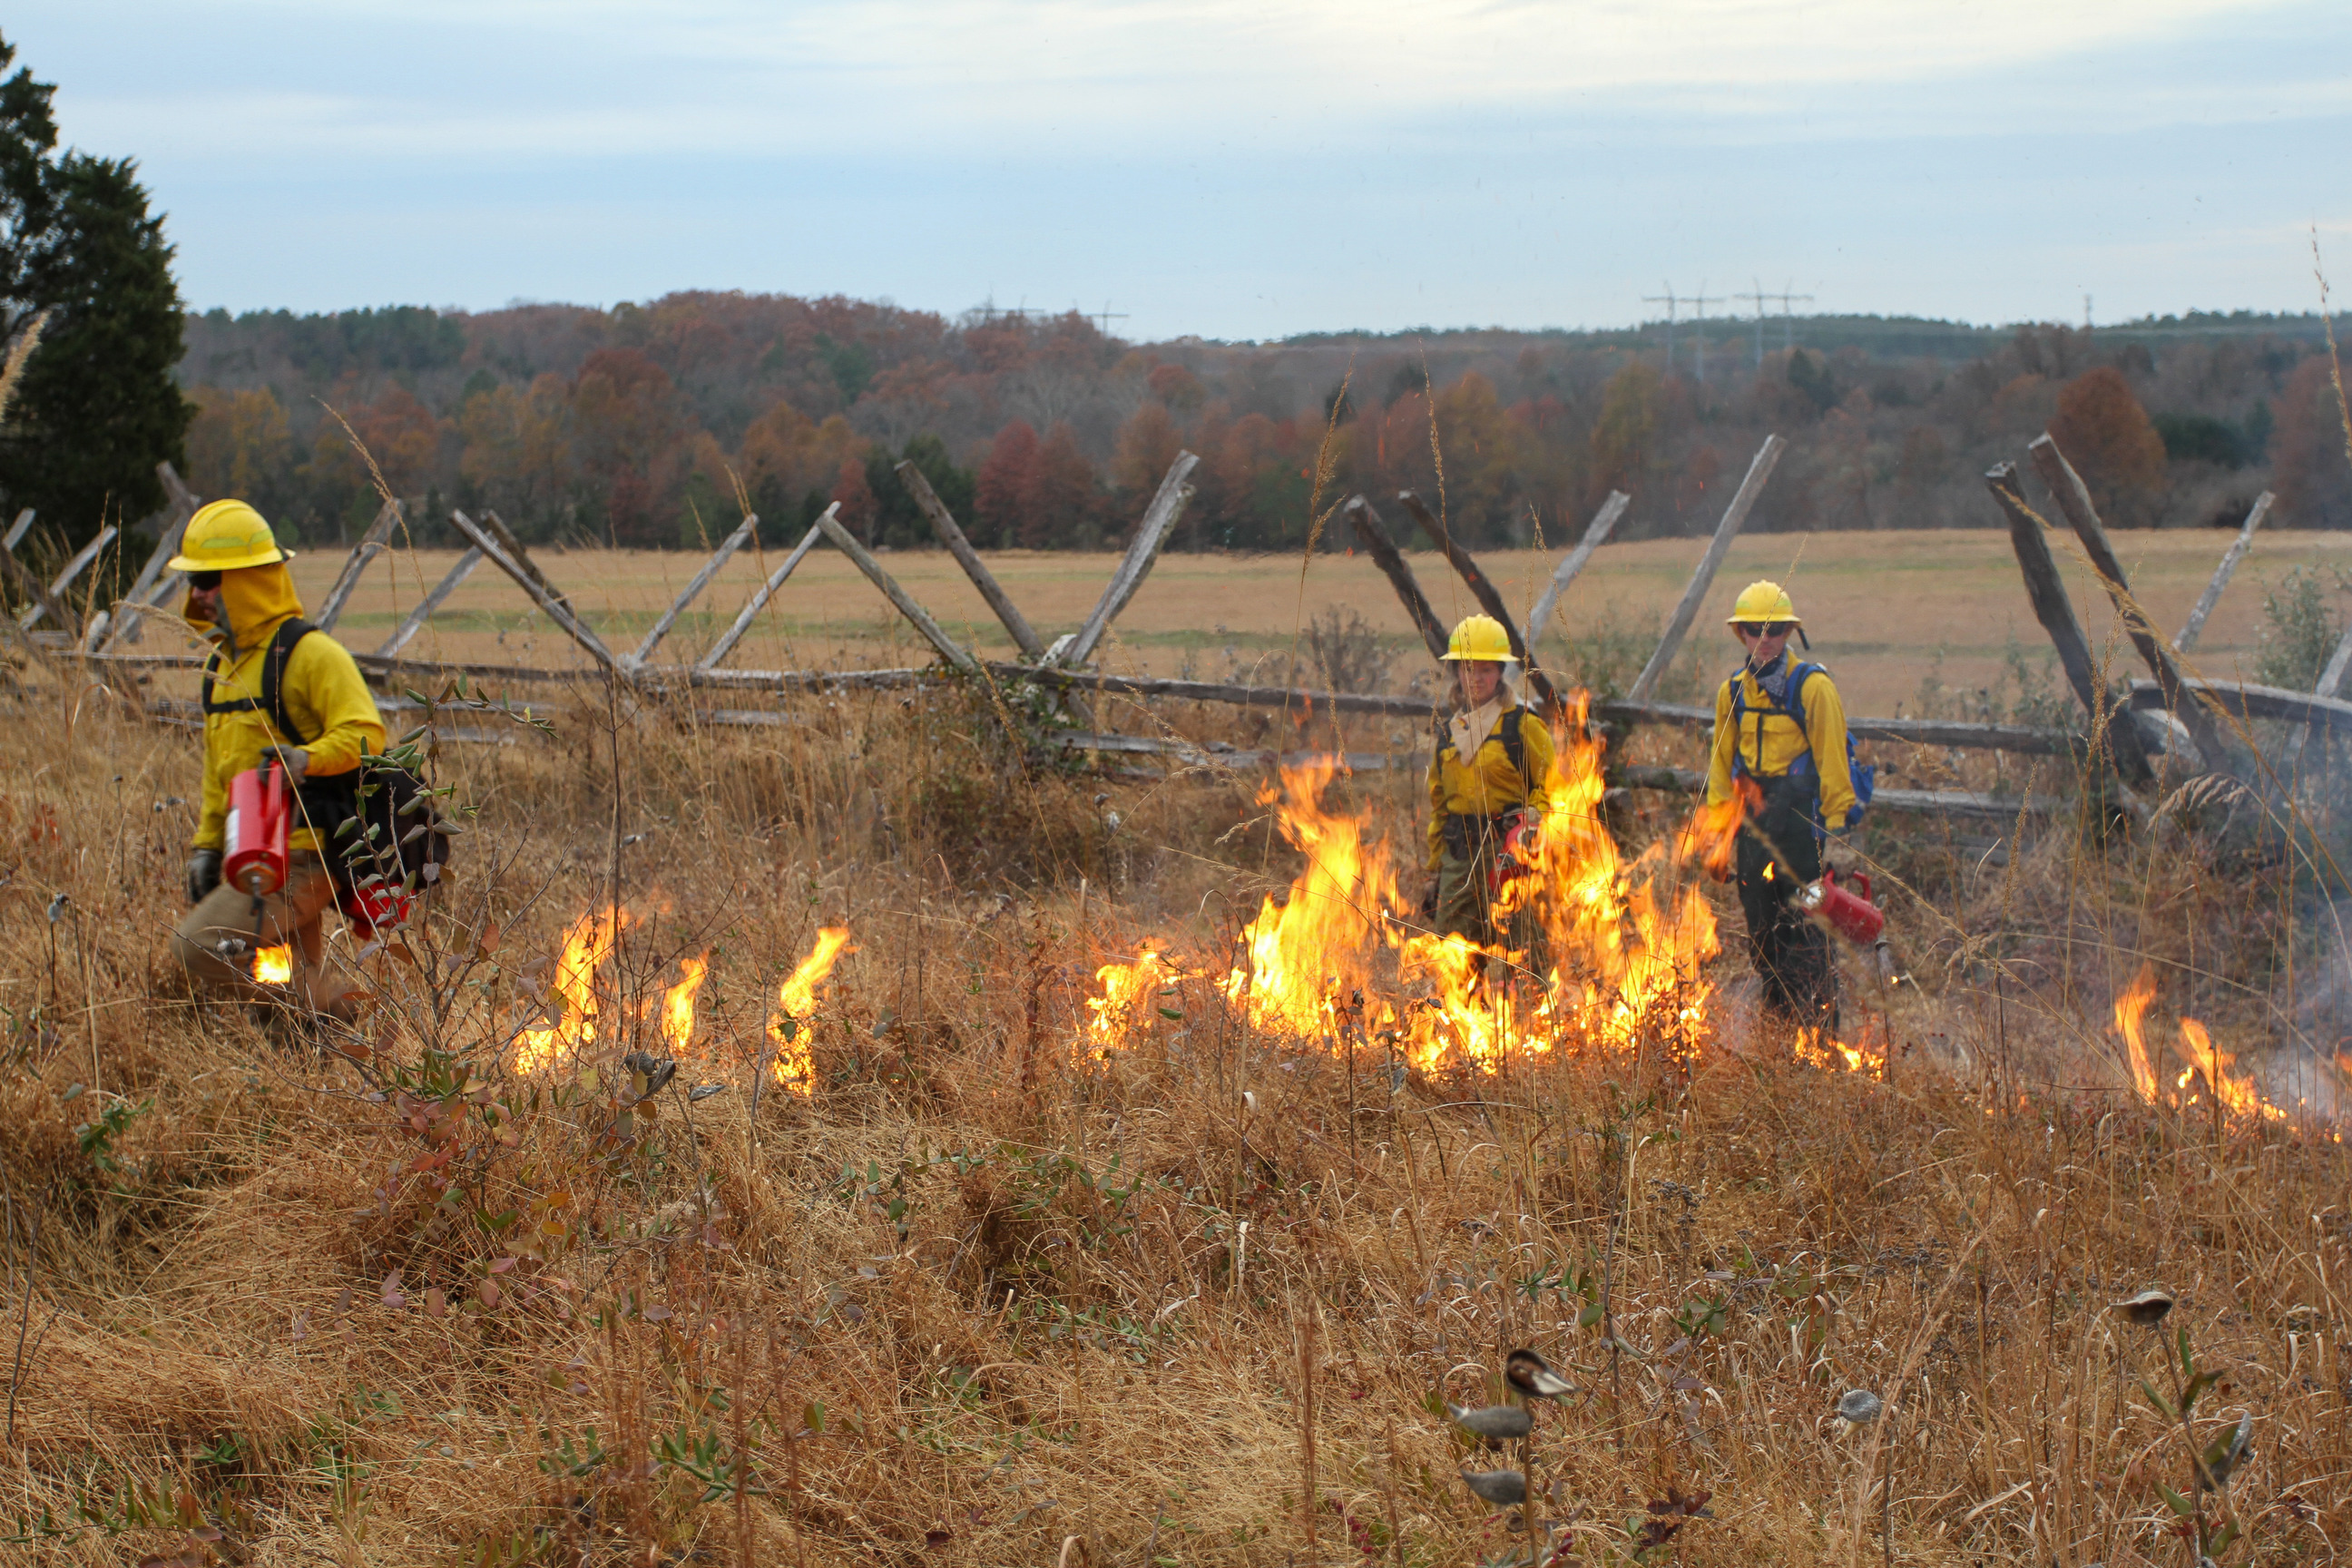 Three people wearing wildland fire protective equipment stand or walk with drip torches in field of high grass near historic wooden fence.